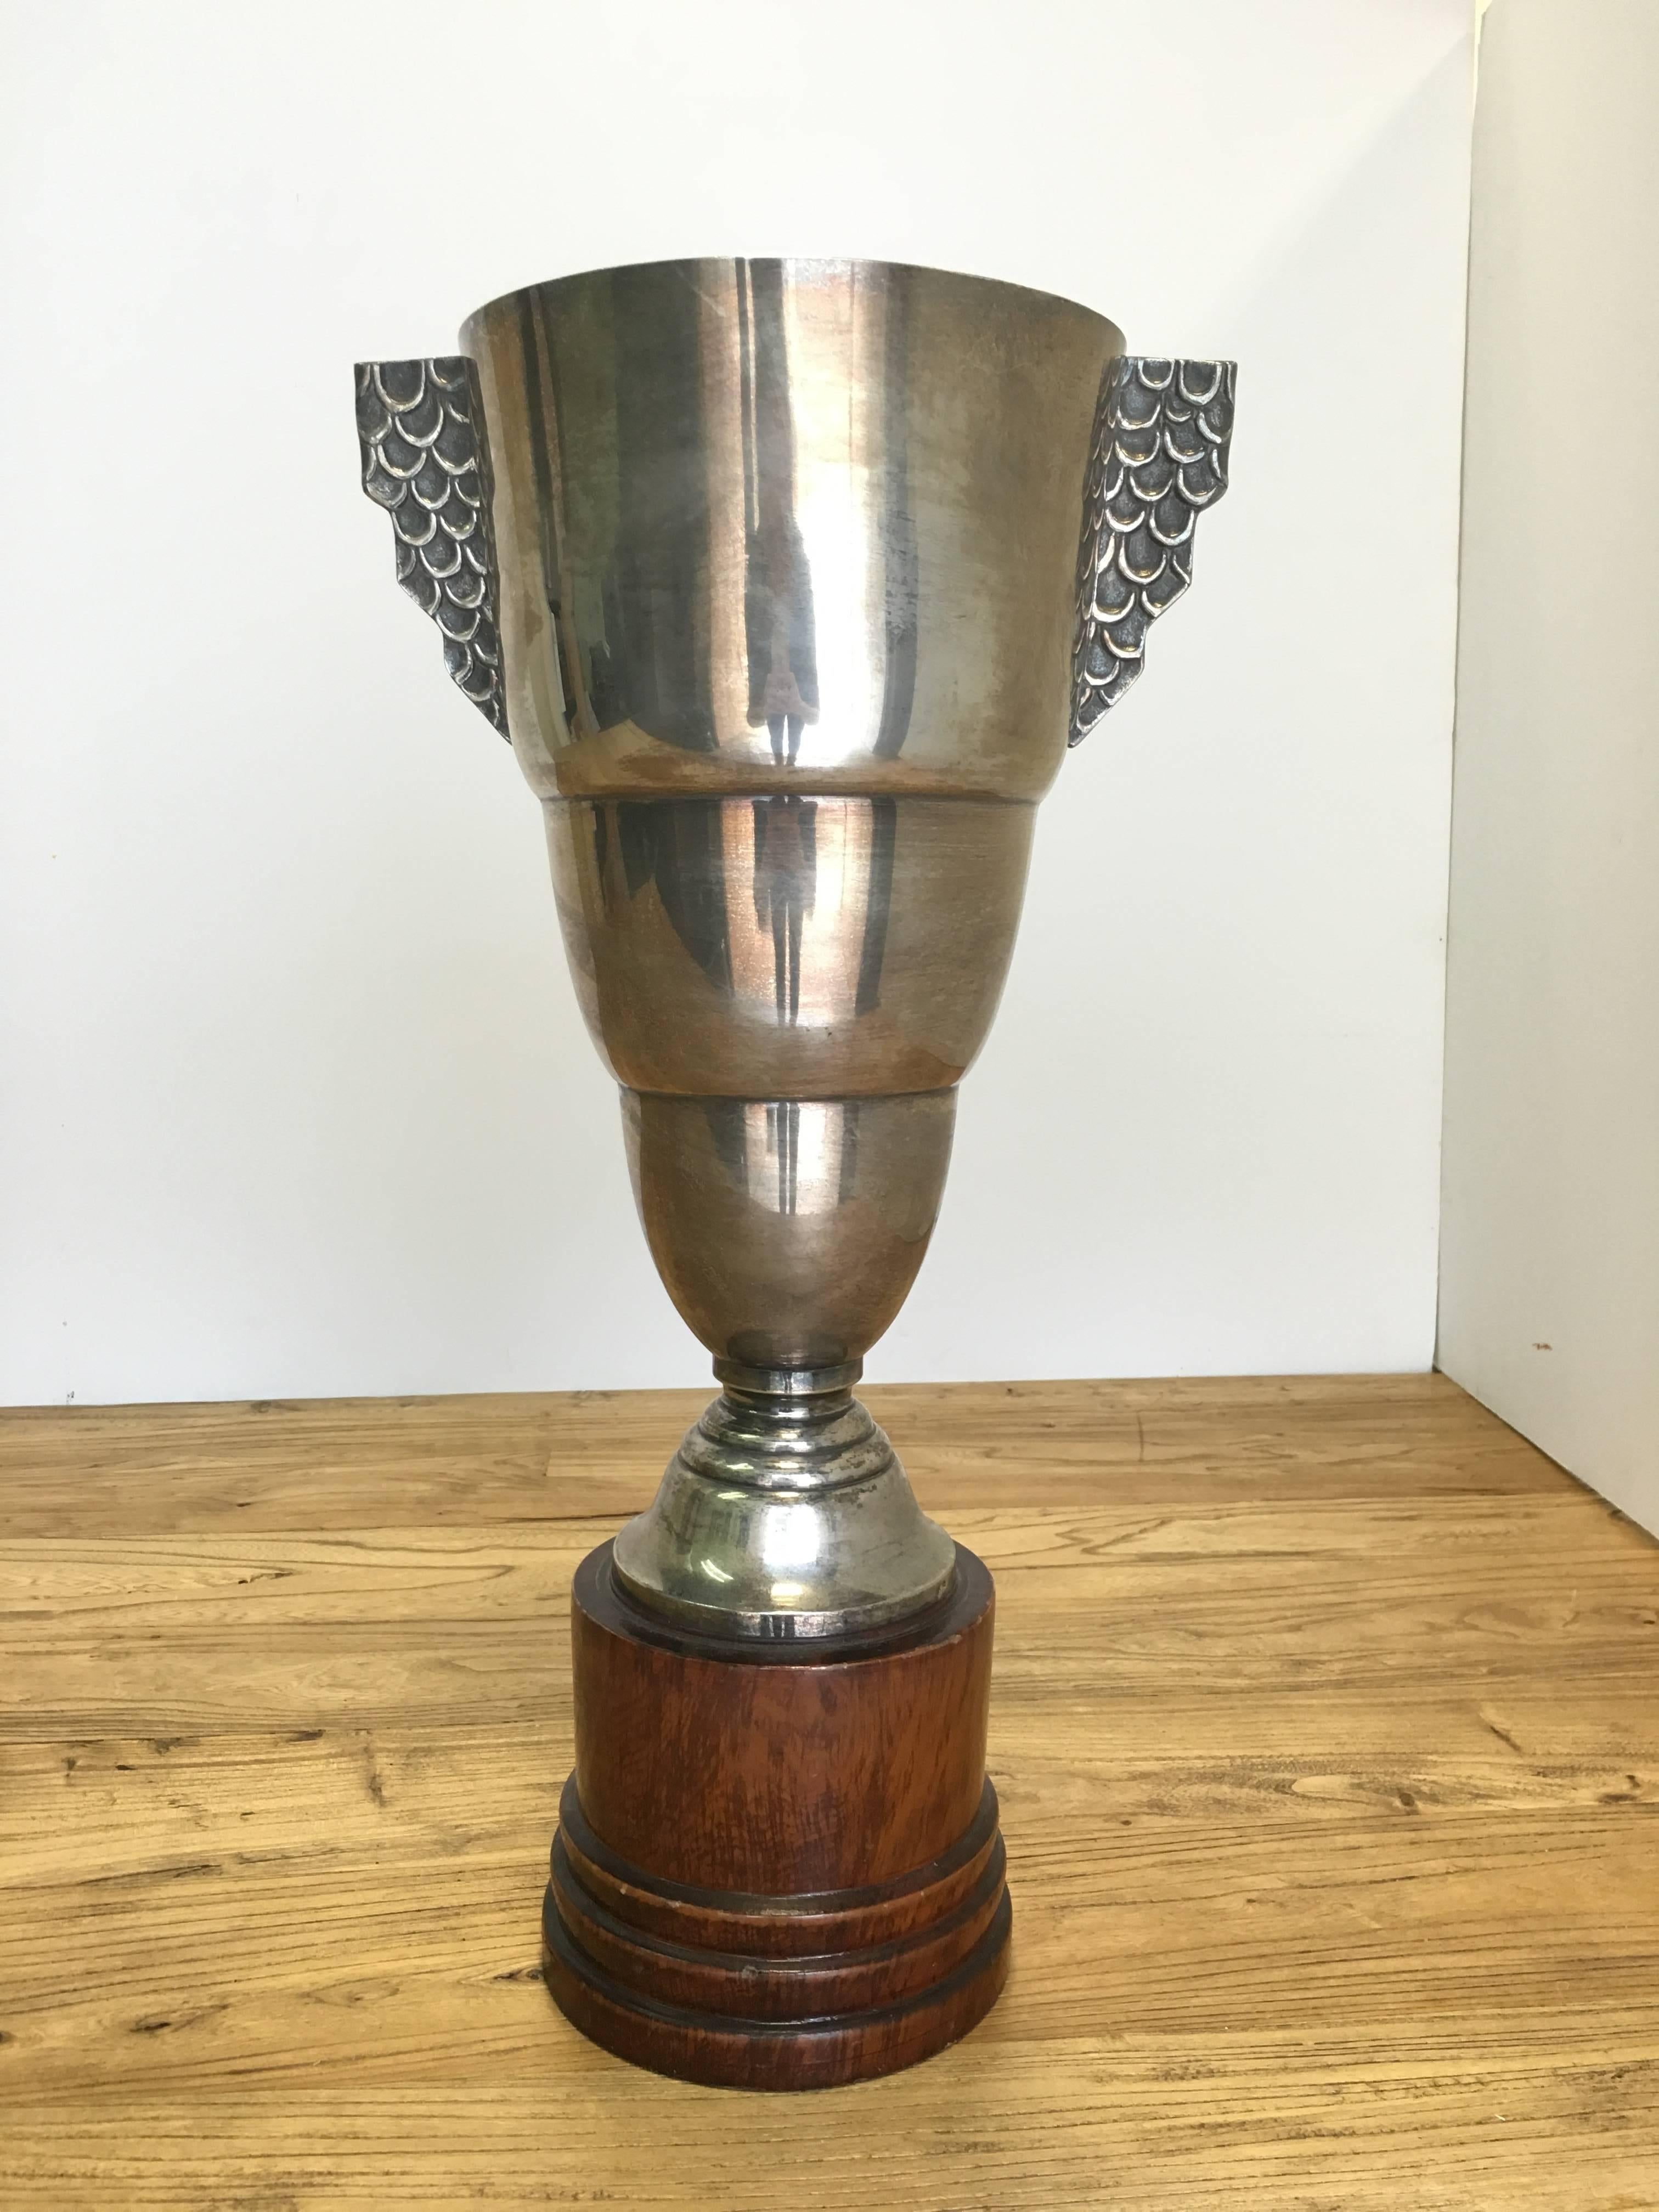 Vintage trophy, dated February 23, 1974 for 